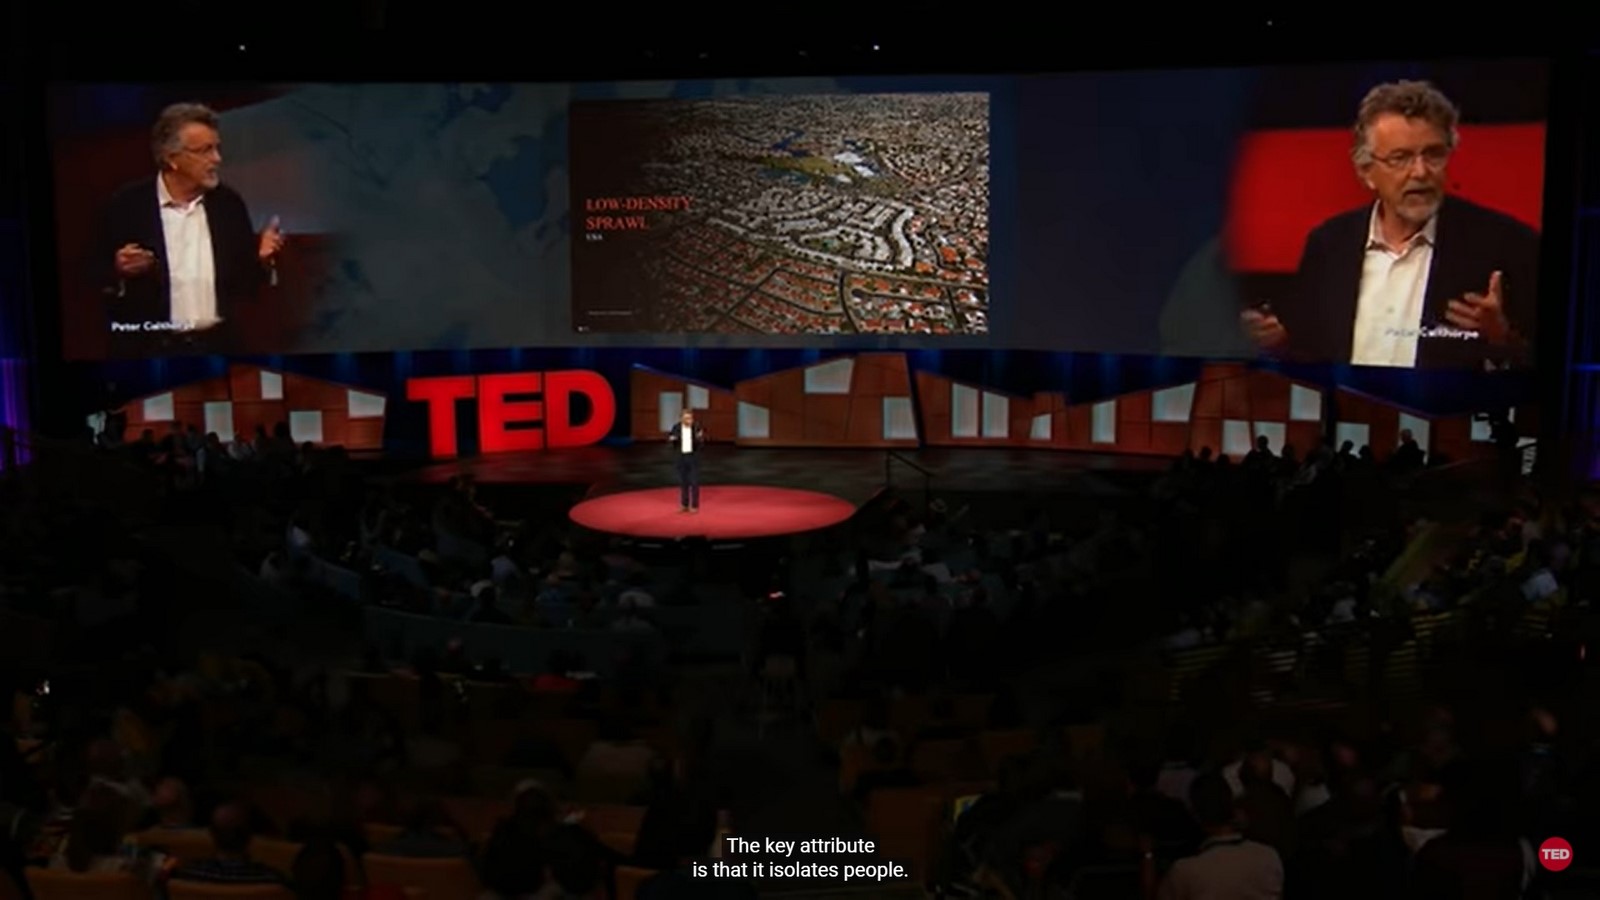 Ted talk Reviews: 7 principles for building better cities by Peter Calthorpe - Sheet2